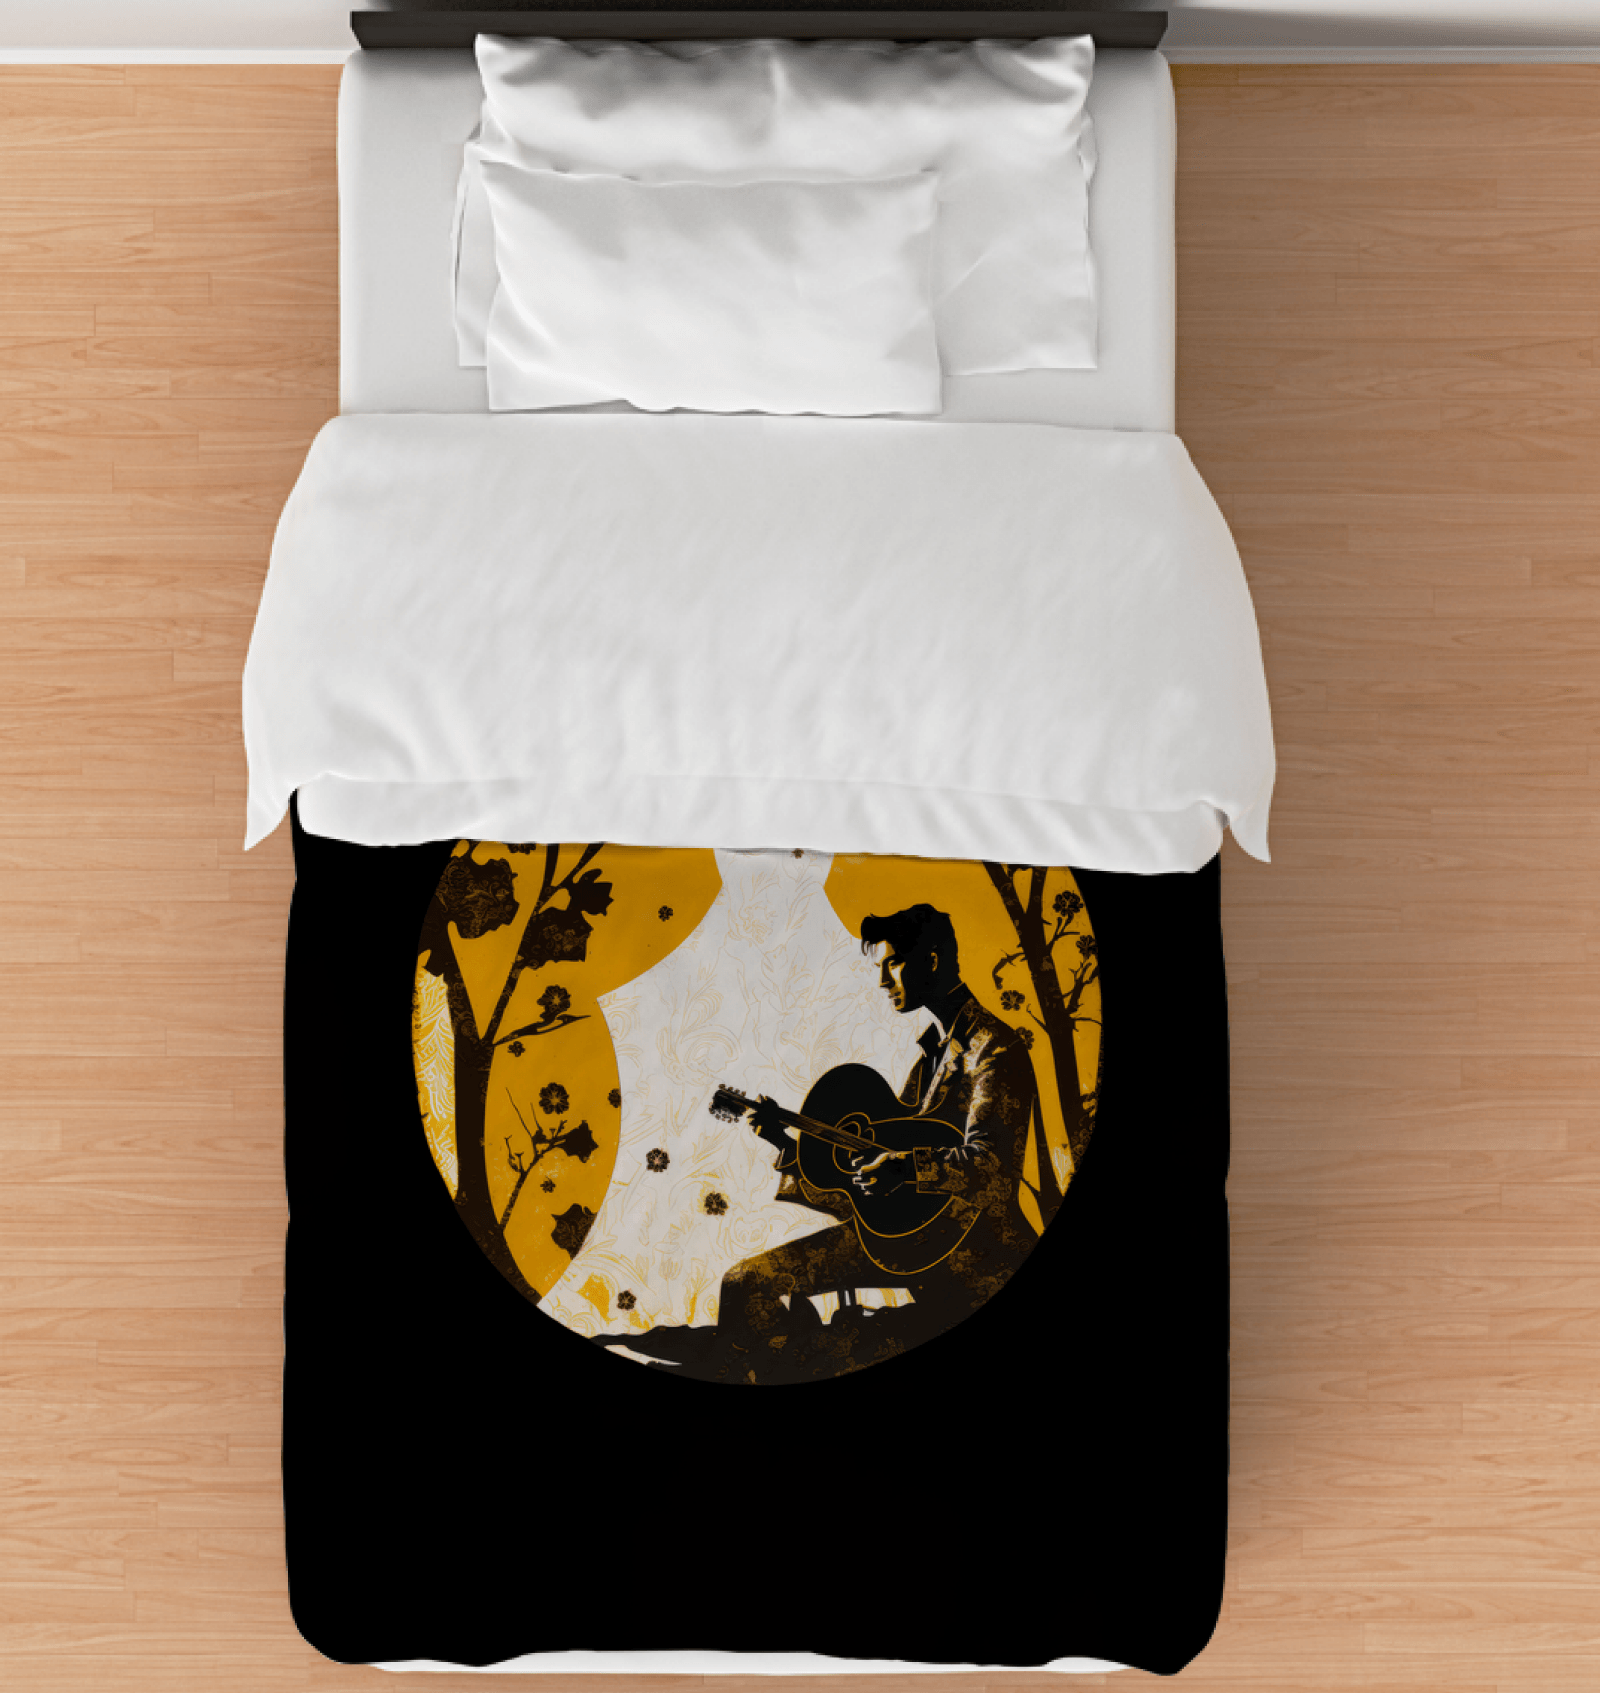 Music-Inspired Dreamland Comforter: Notes of Comfort - Beyond T-shirts